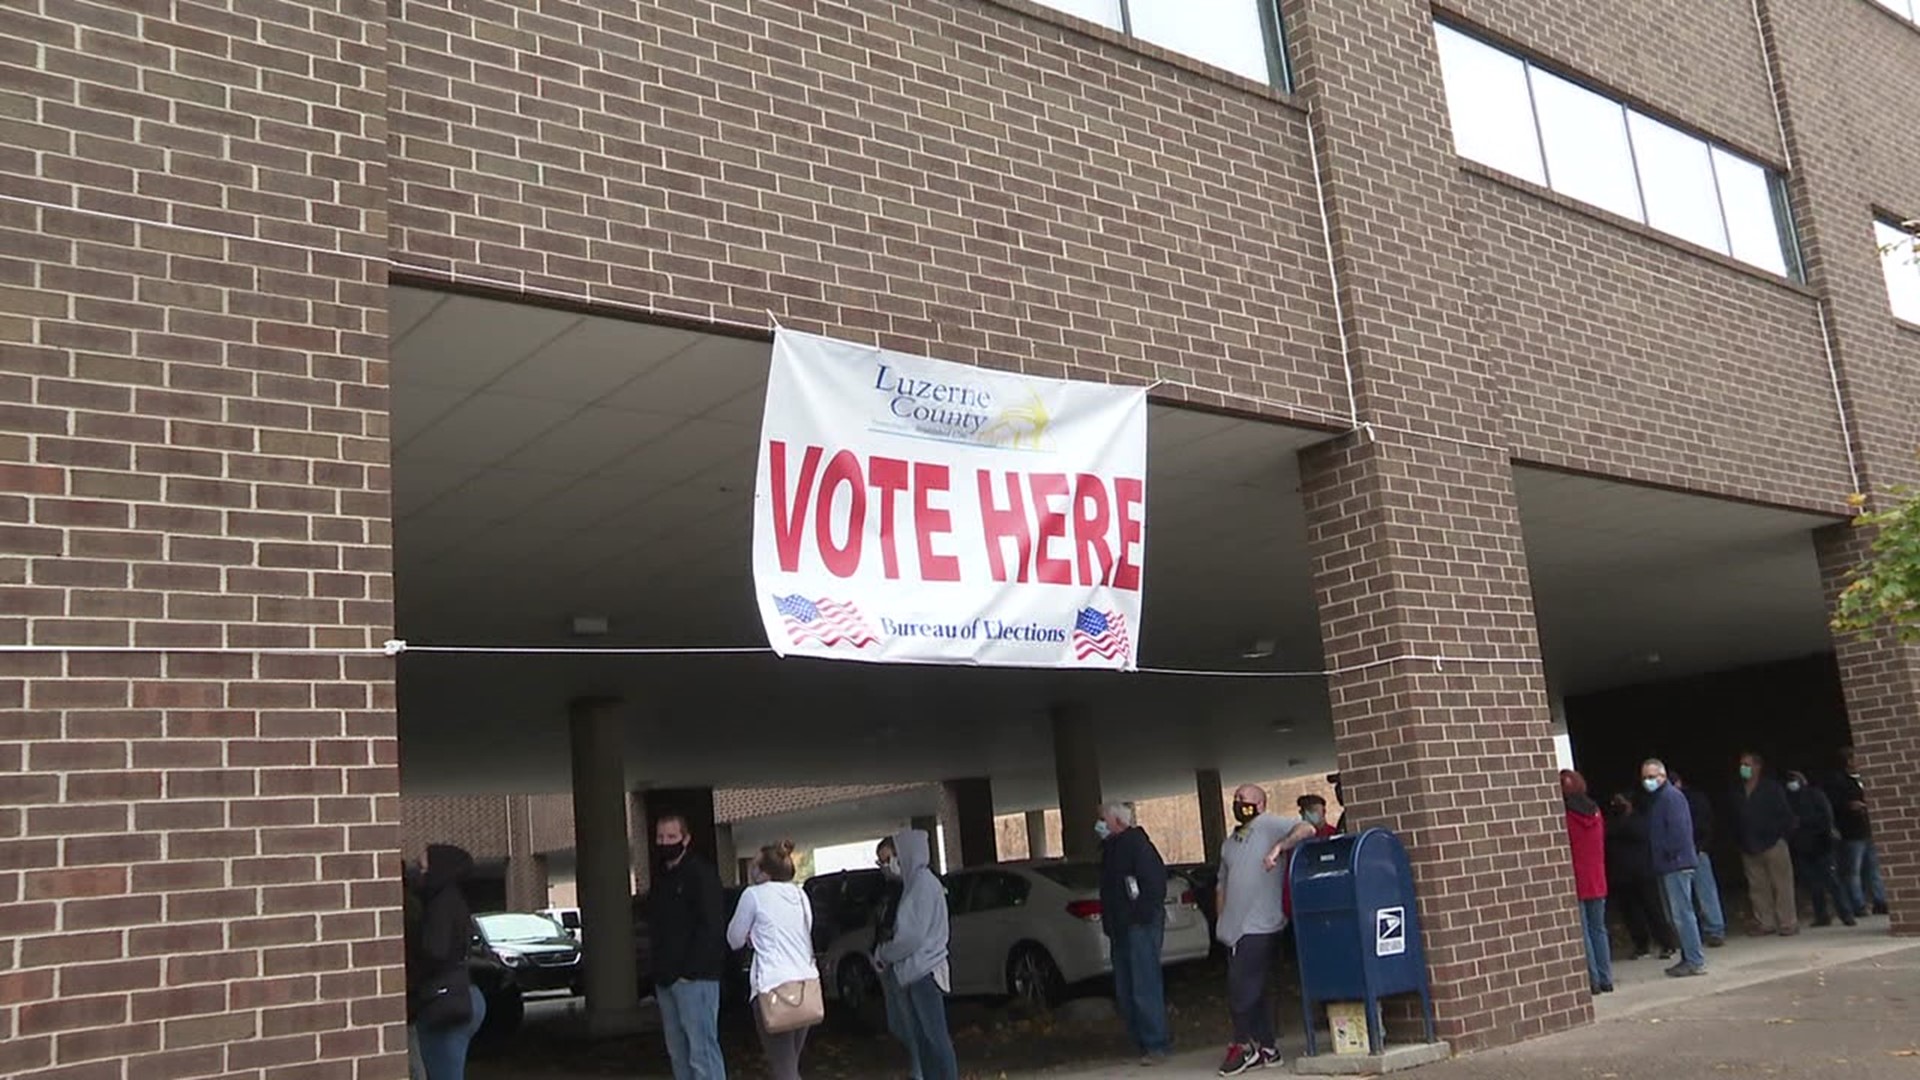 With just one more day of early in-person voting, the Luzerne County Election Bureau was busy Monday.